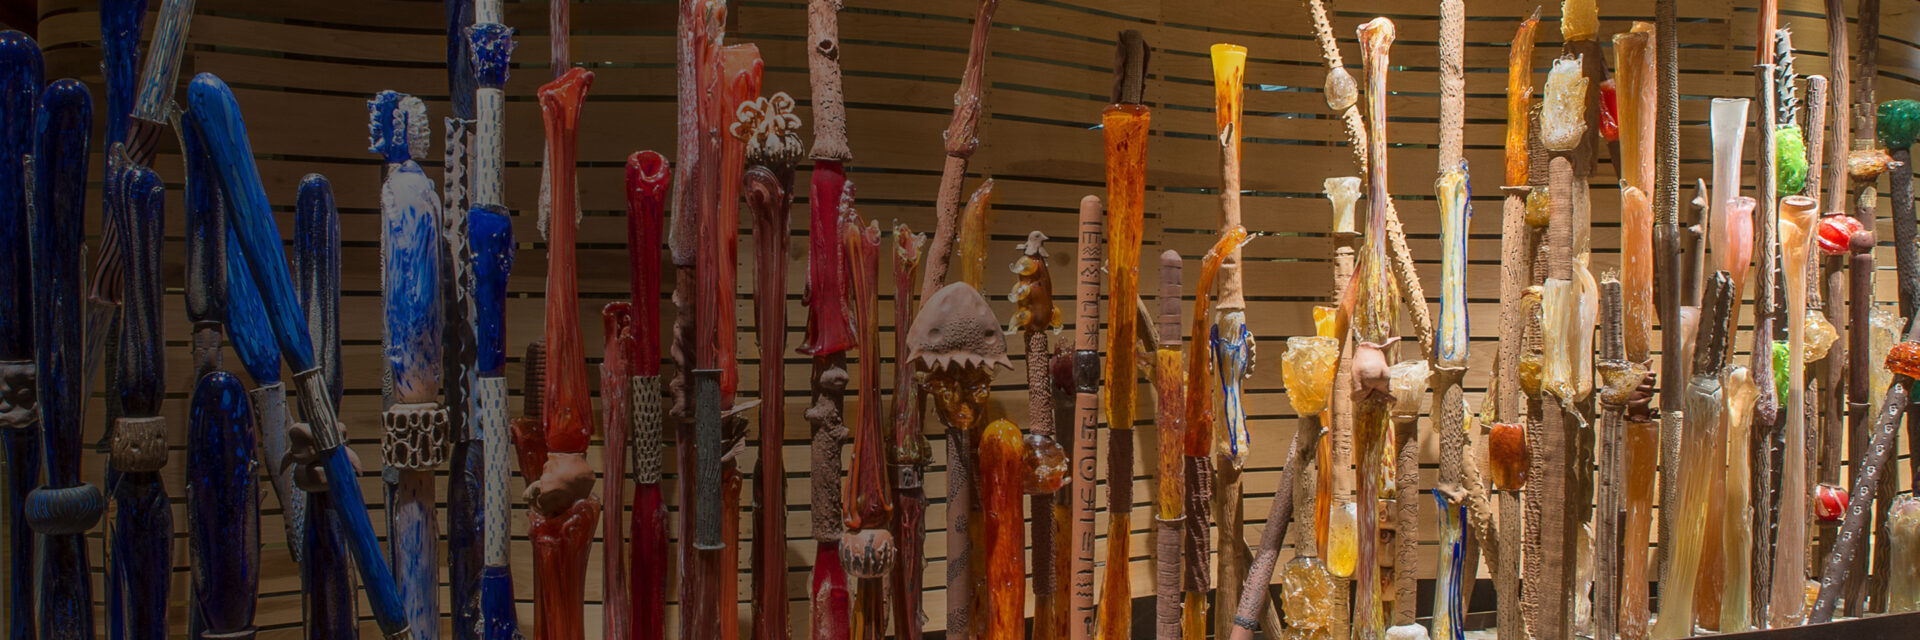 A display of many different colored sticks on a wall, known as the Art Fence.